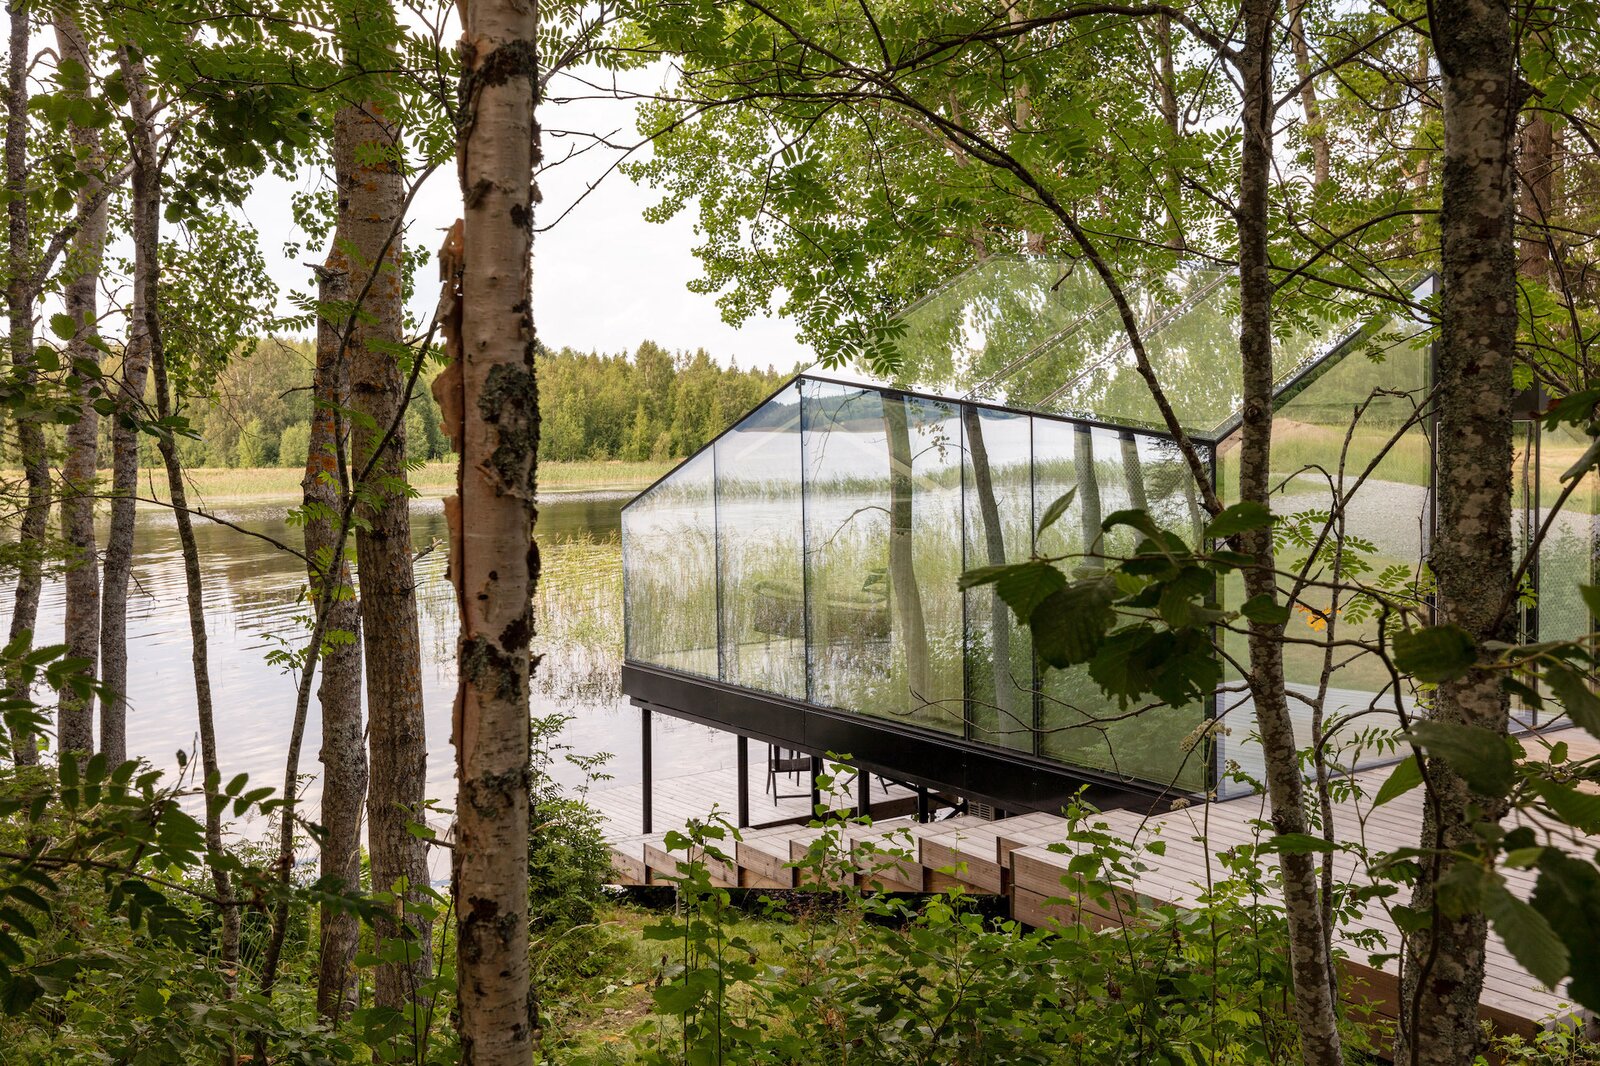 A Tiny Glass Cabin Perches for Wilderness Views in Remote Finland